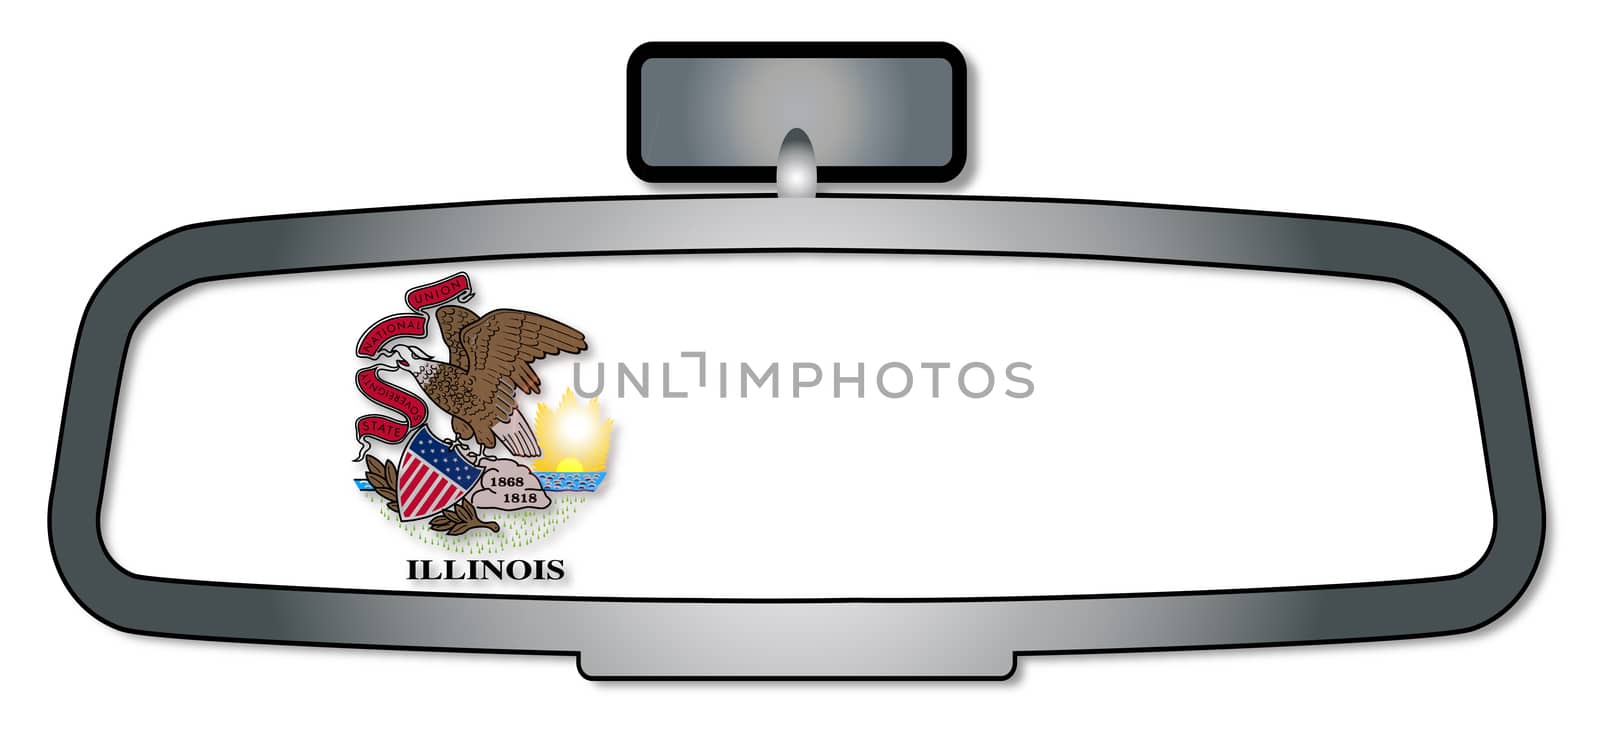 A vehicle rear view mirror with the flag of the state of Illinois